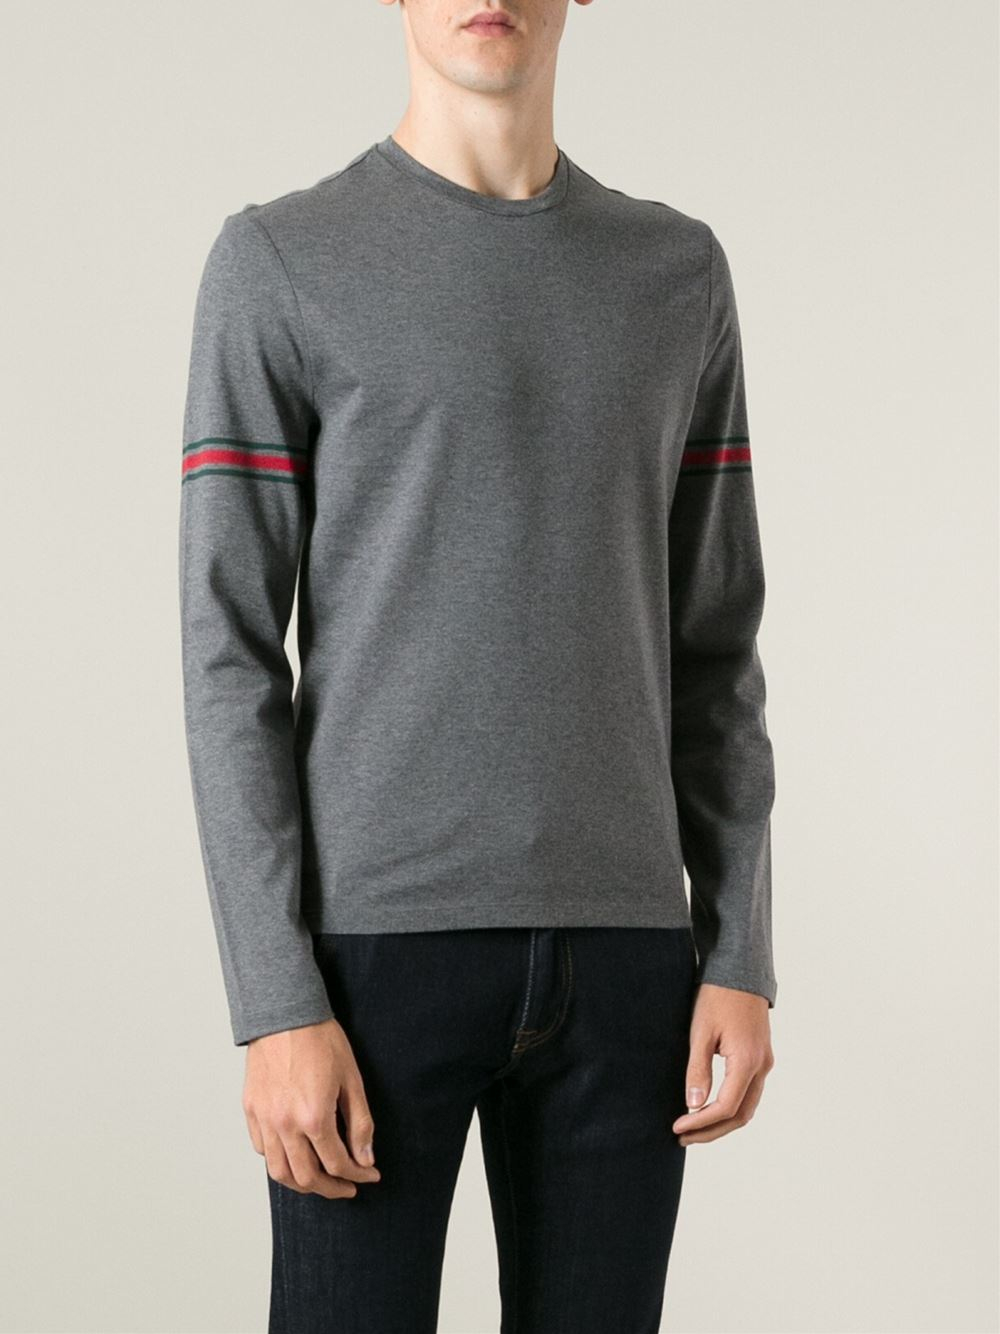 Lyst - Gucci Long Sleeve T-Shirt in Gray for Men